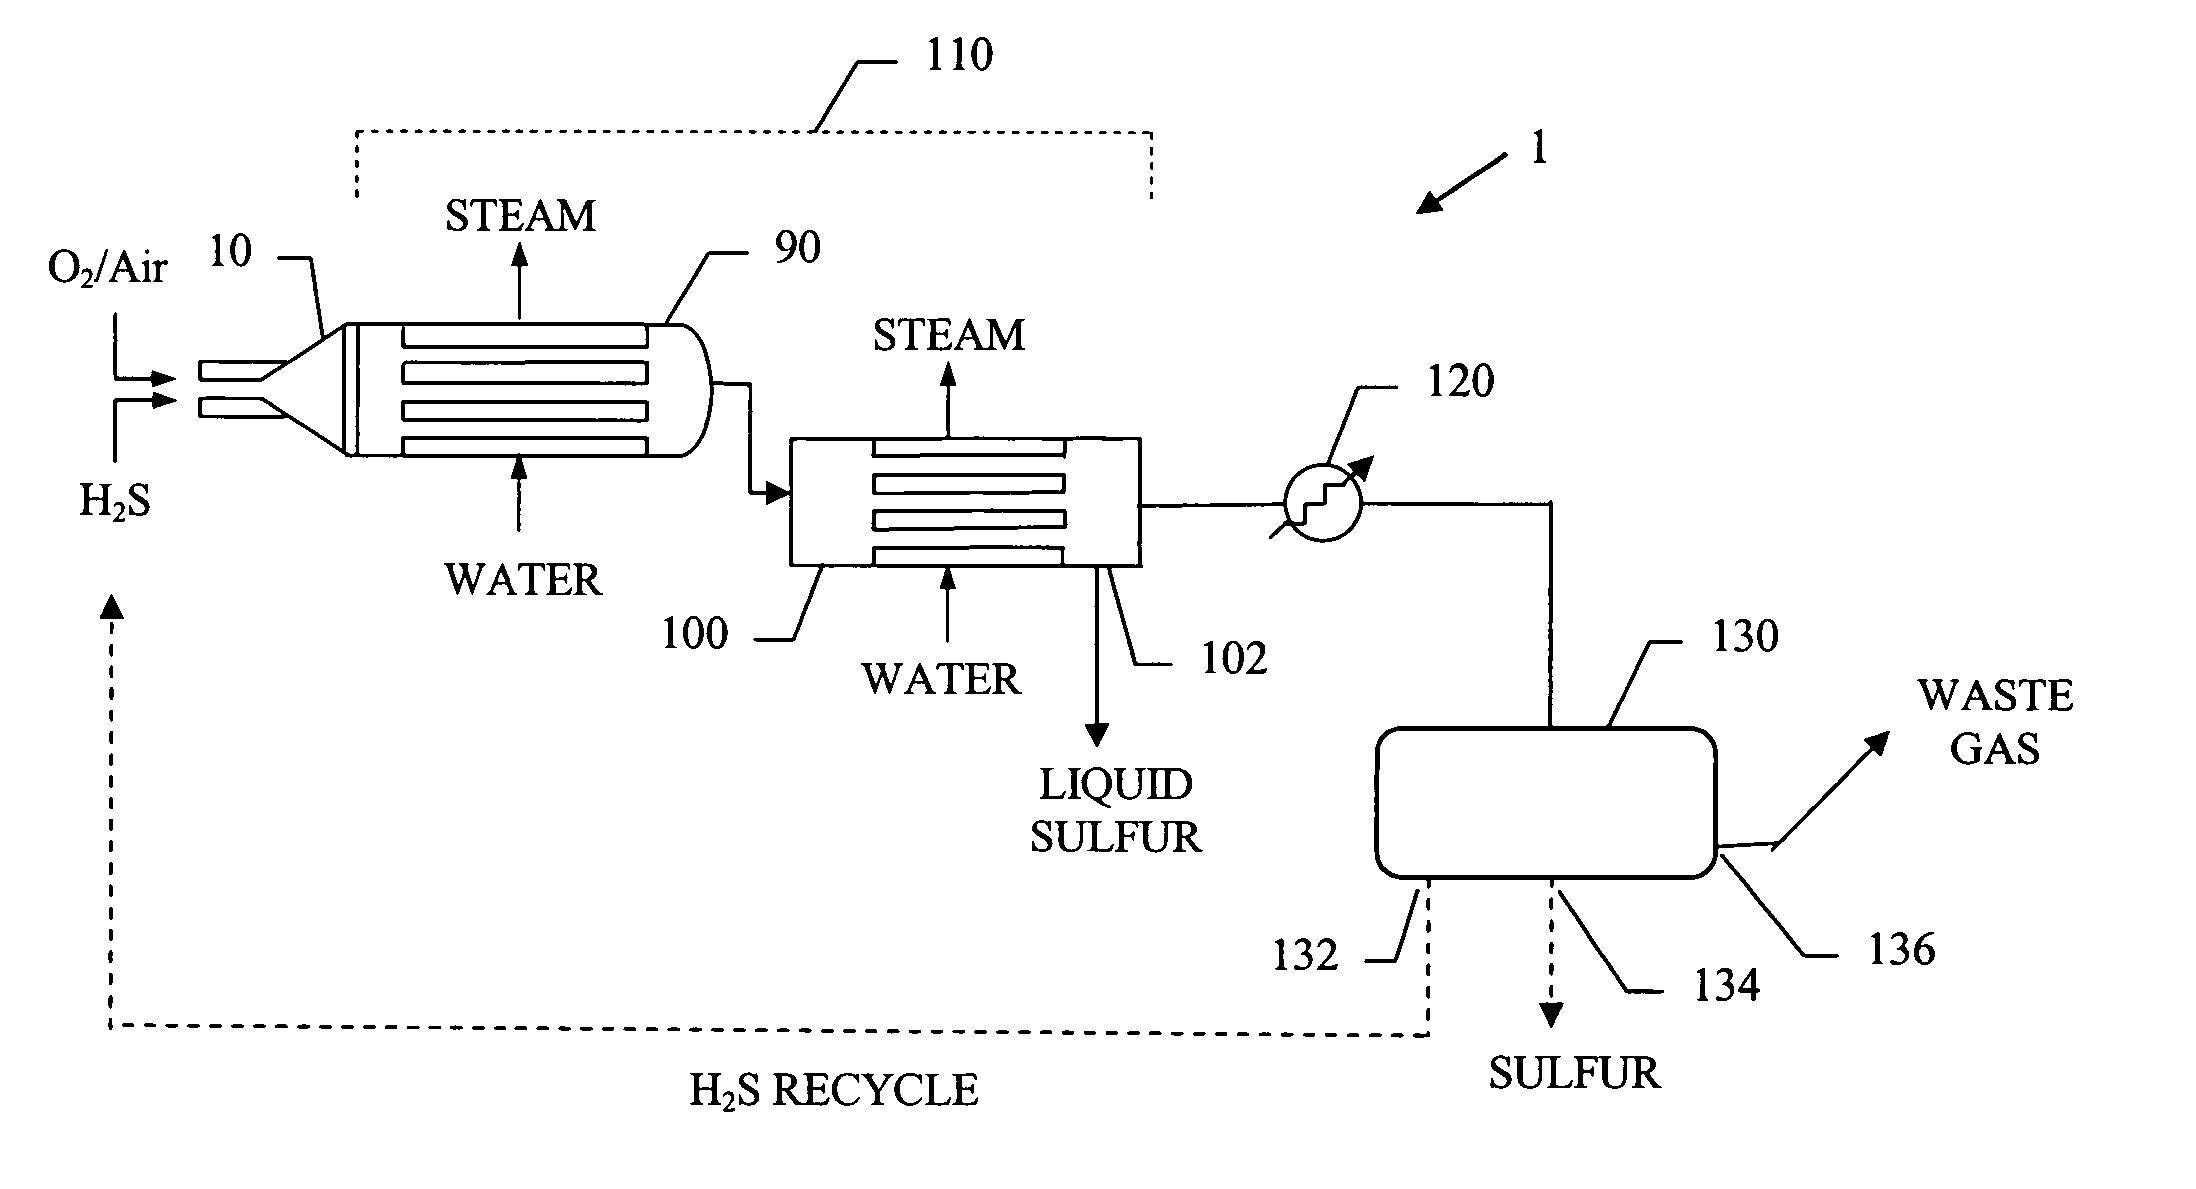 Process for the catalytic partial oxidation of H2S using staged addition of oxygen